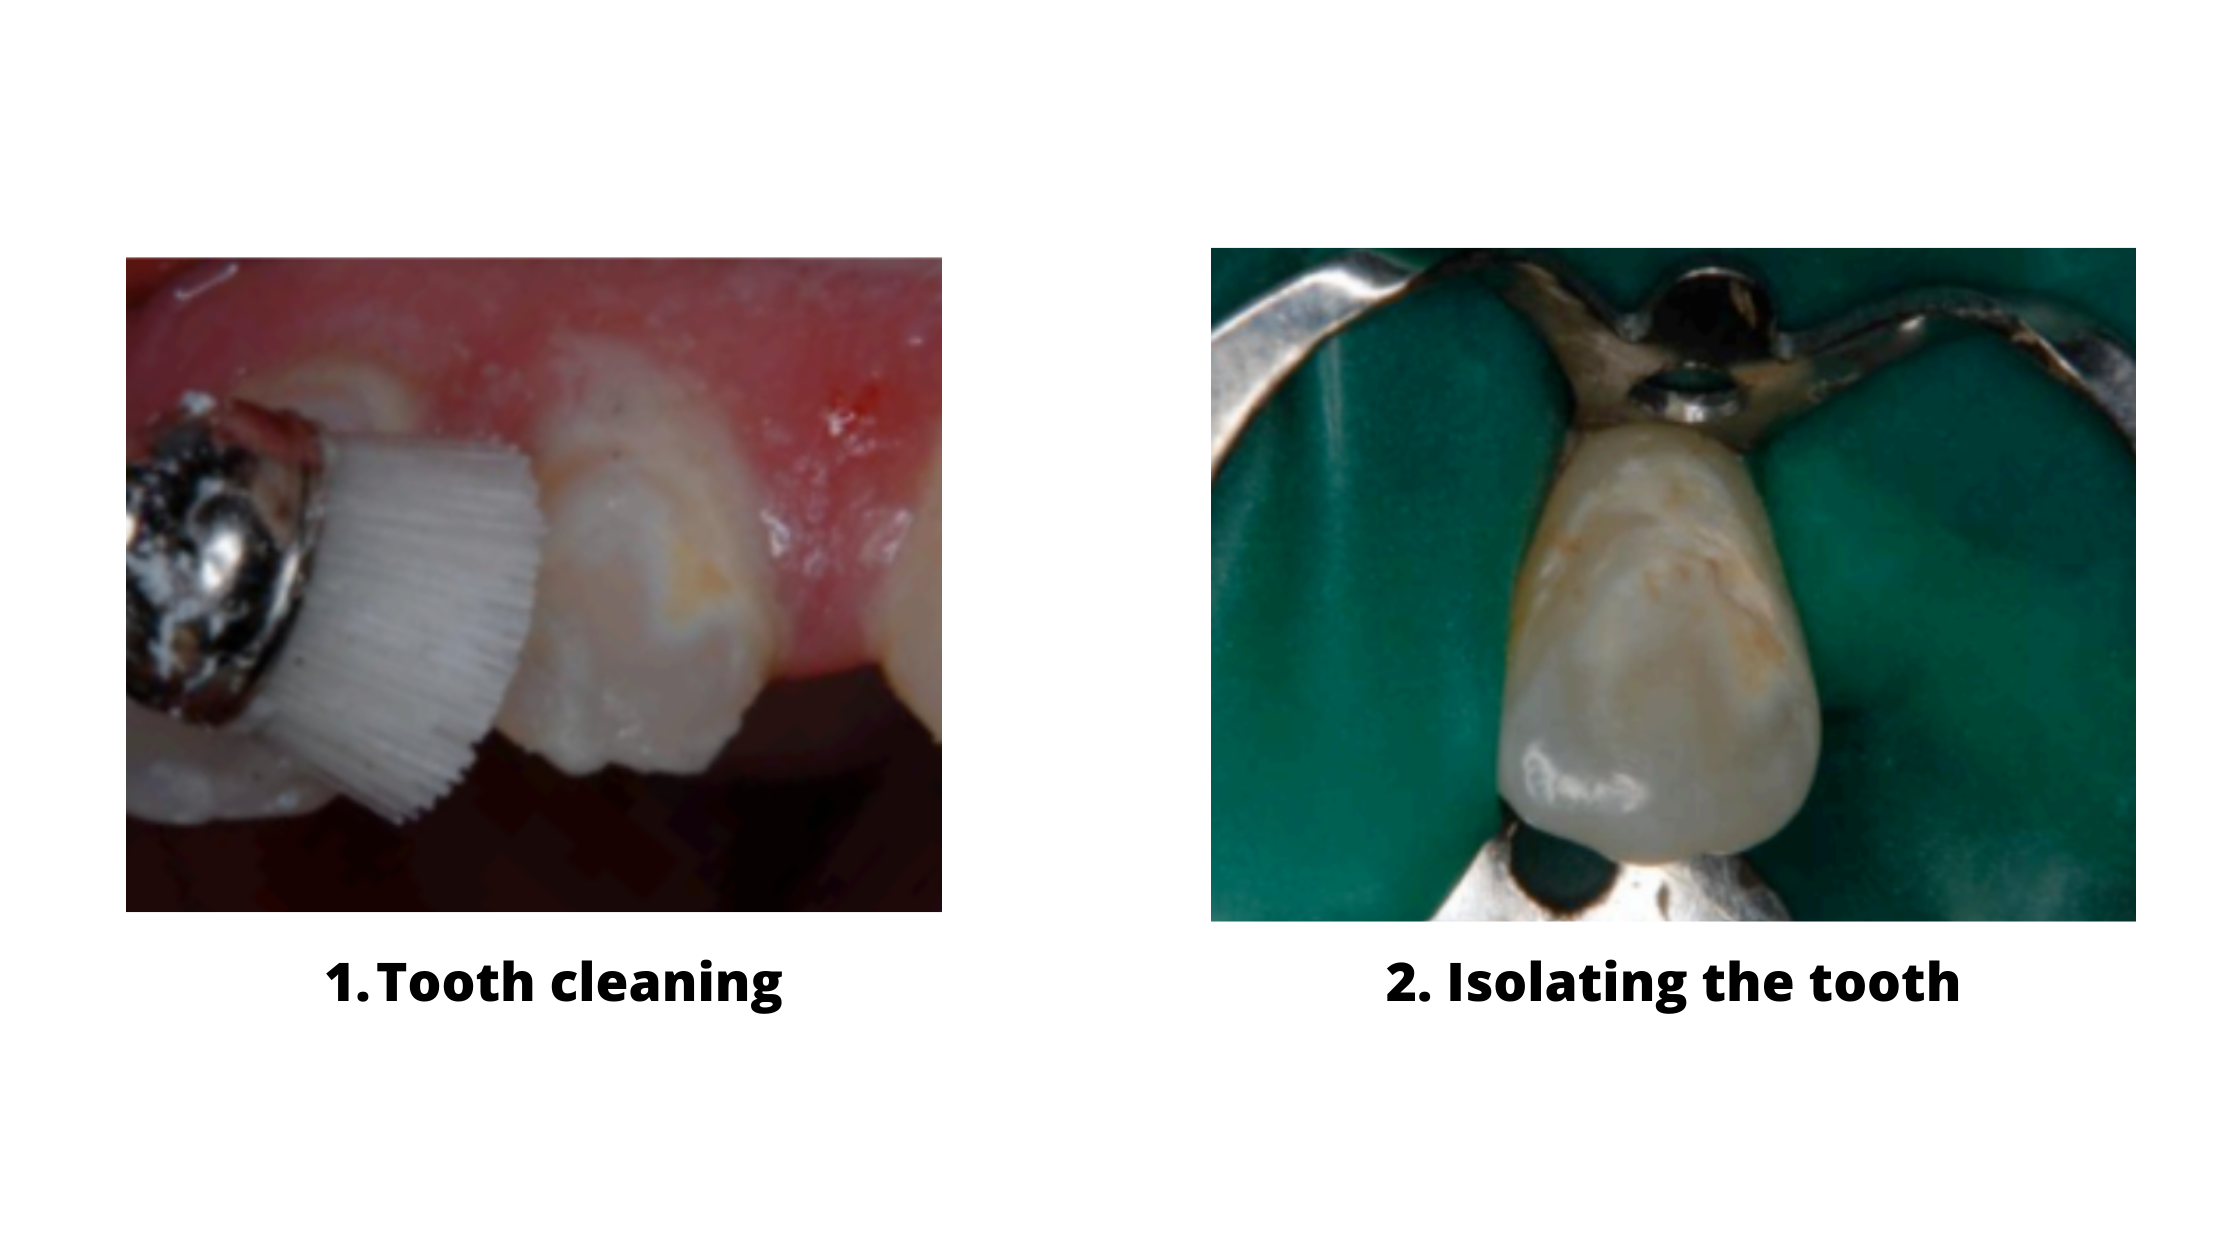 tooth preparation: cleaning and isolating the tooth